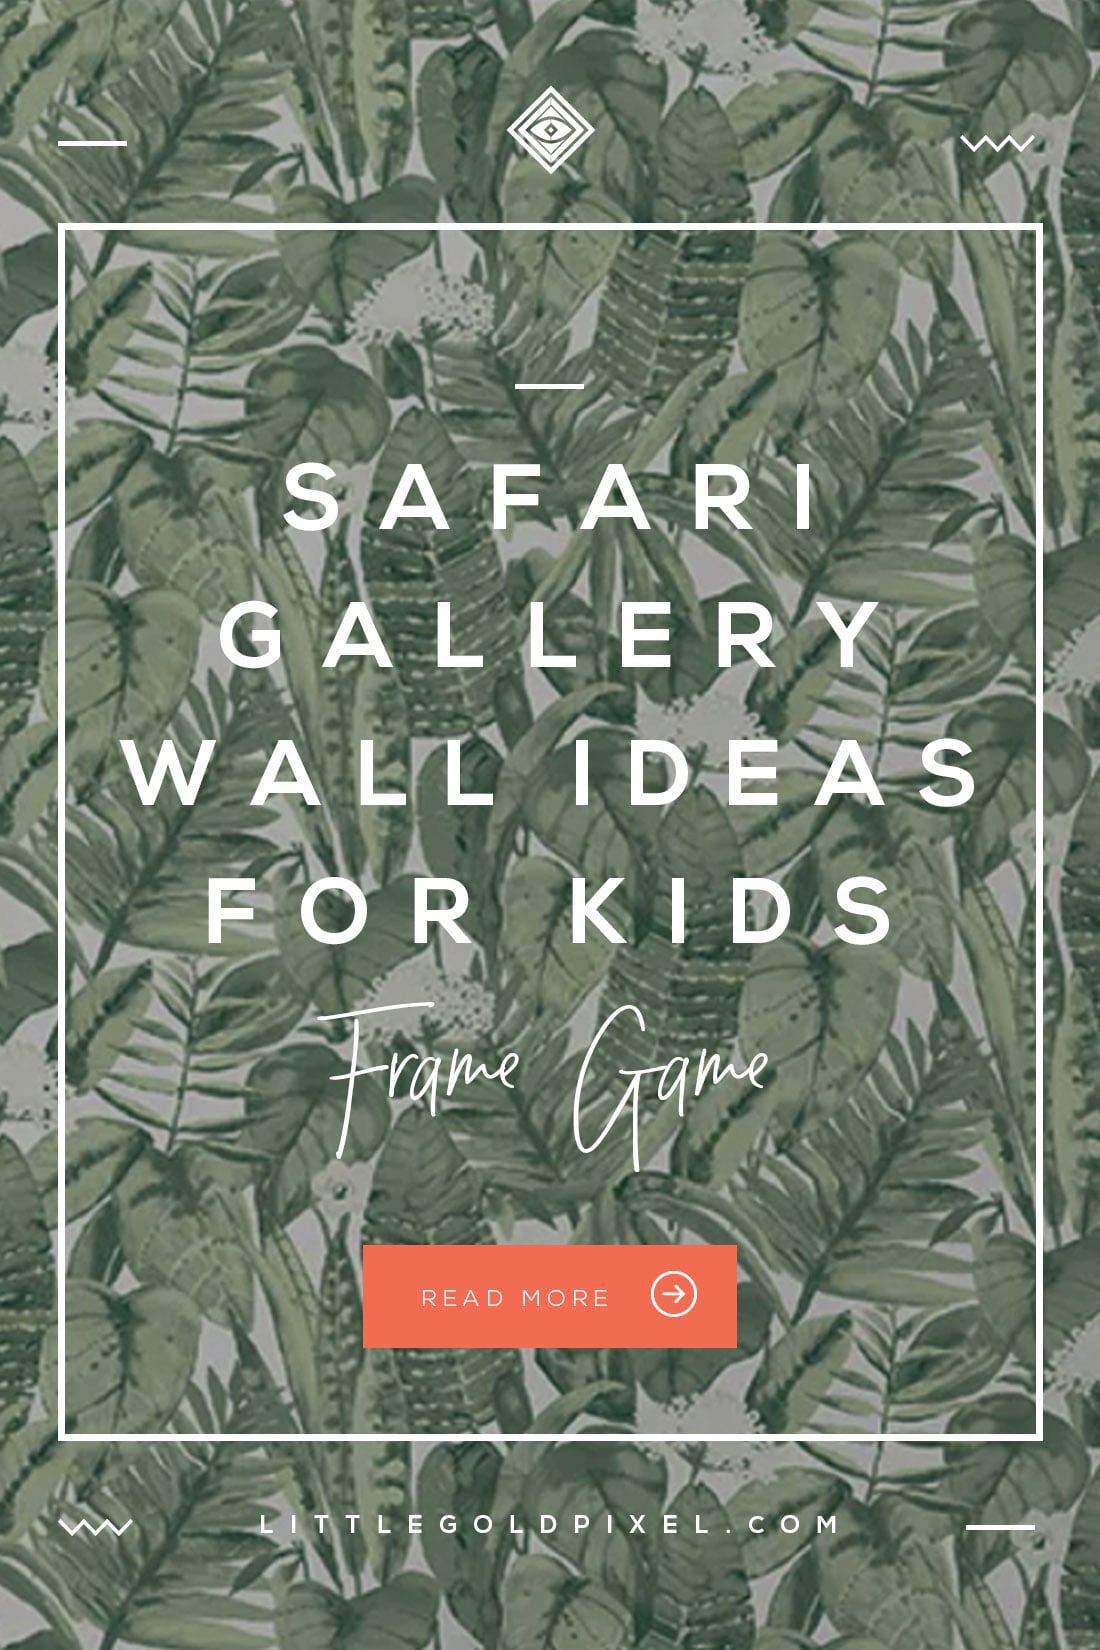 Safari Gallery Wall Ideas for Kids of All Ages • Little Gold Pixel • In which I curate a few safari gallery wall ideas for kids — ones that will grow with them from nursery to big kid status. Part of the Frame Game series. • #safari #gallerywall #gallerywallideas #kidsroom #wallart #freeprintables